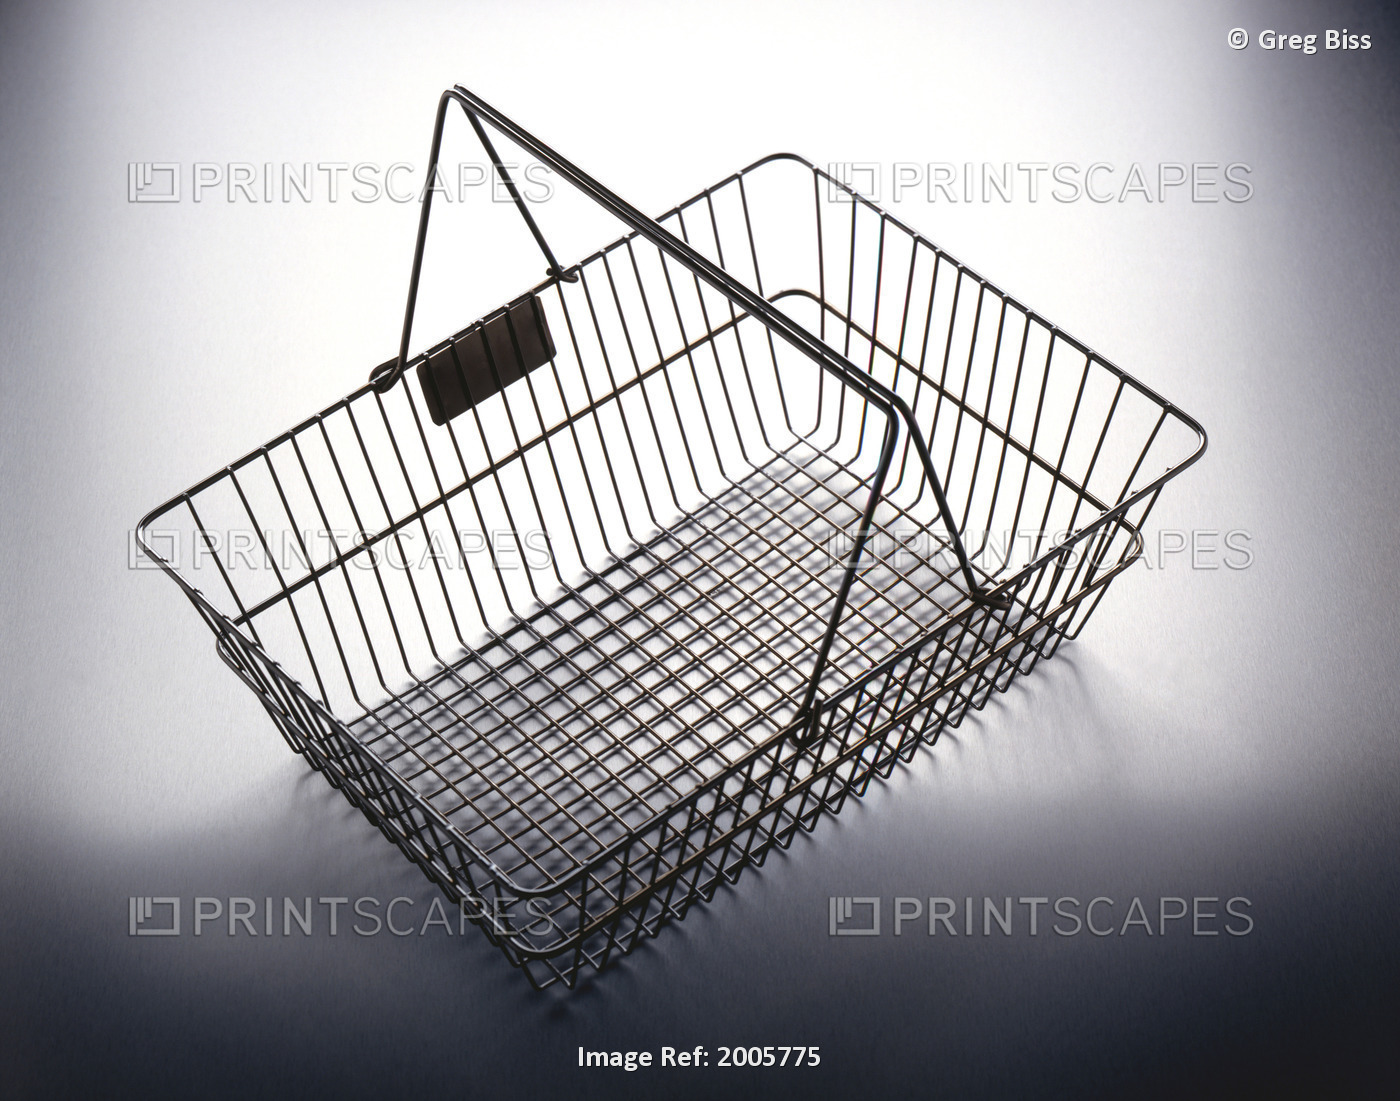 G.Biss Photography; Empty Shopping Basket